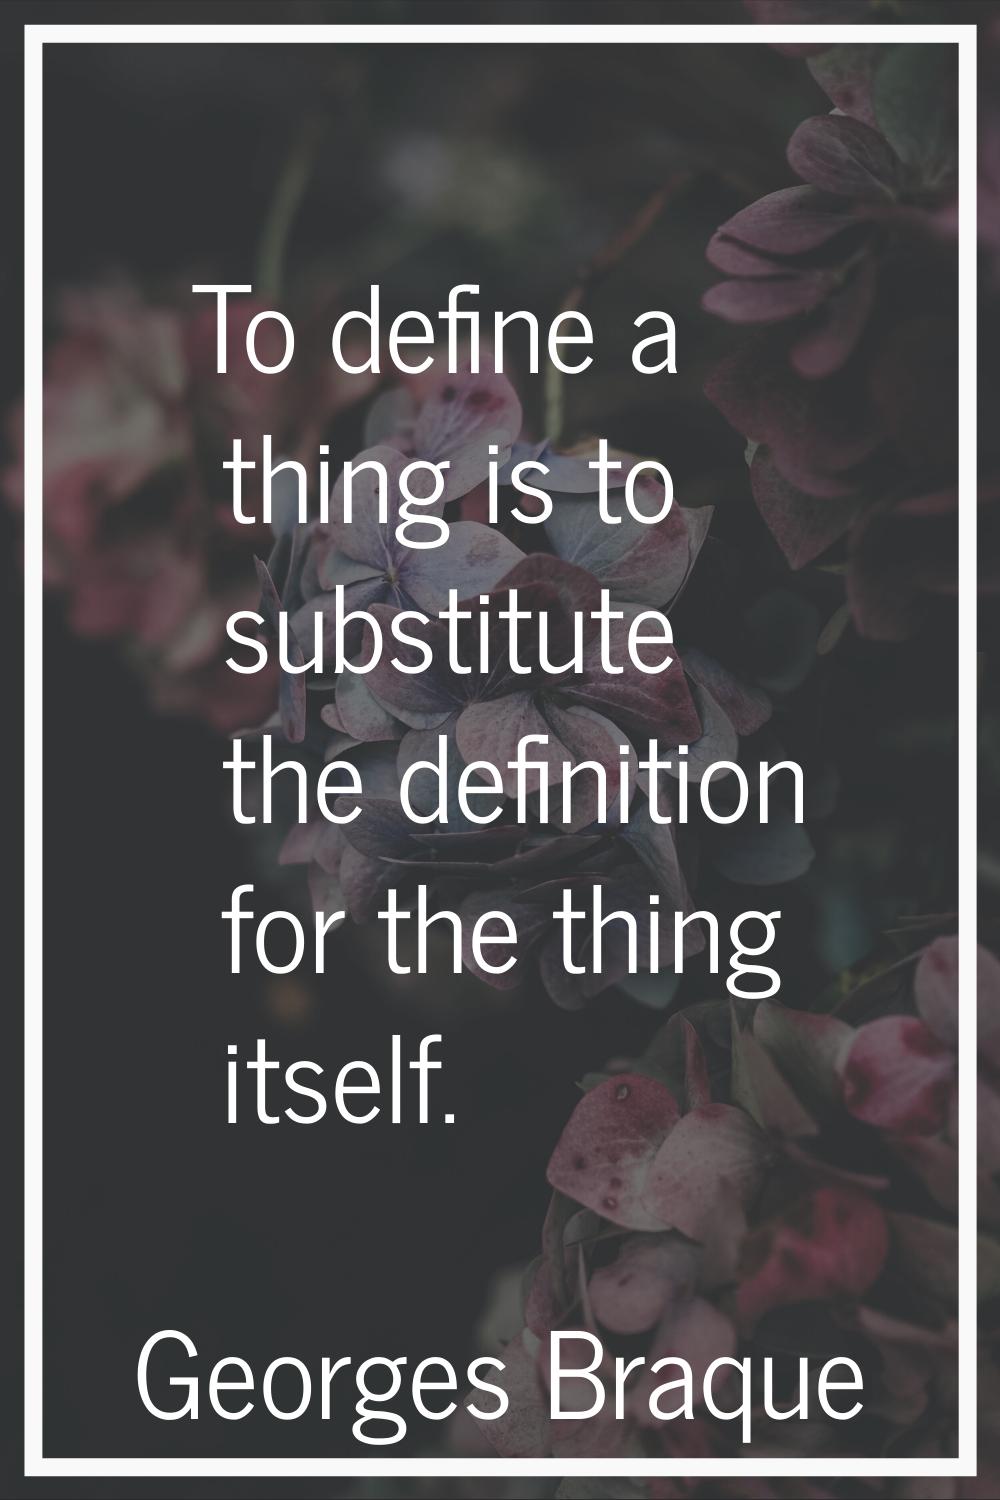 To define a thing is to substitute the definition for the thing itself.